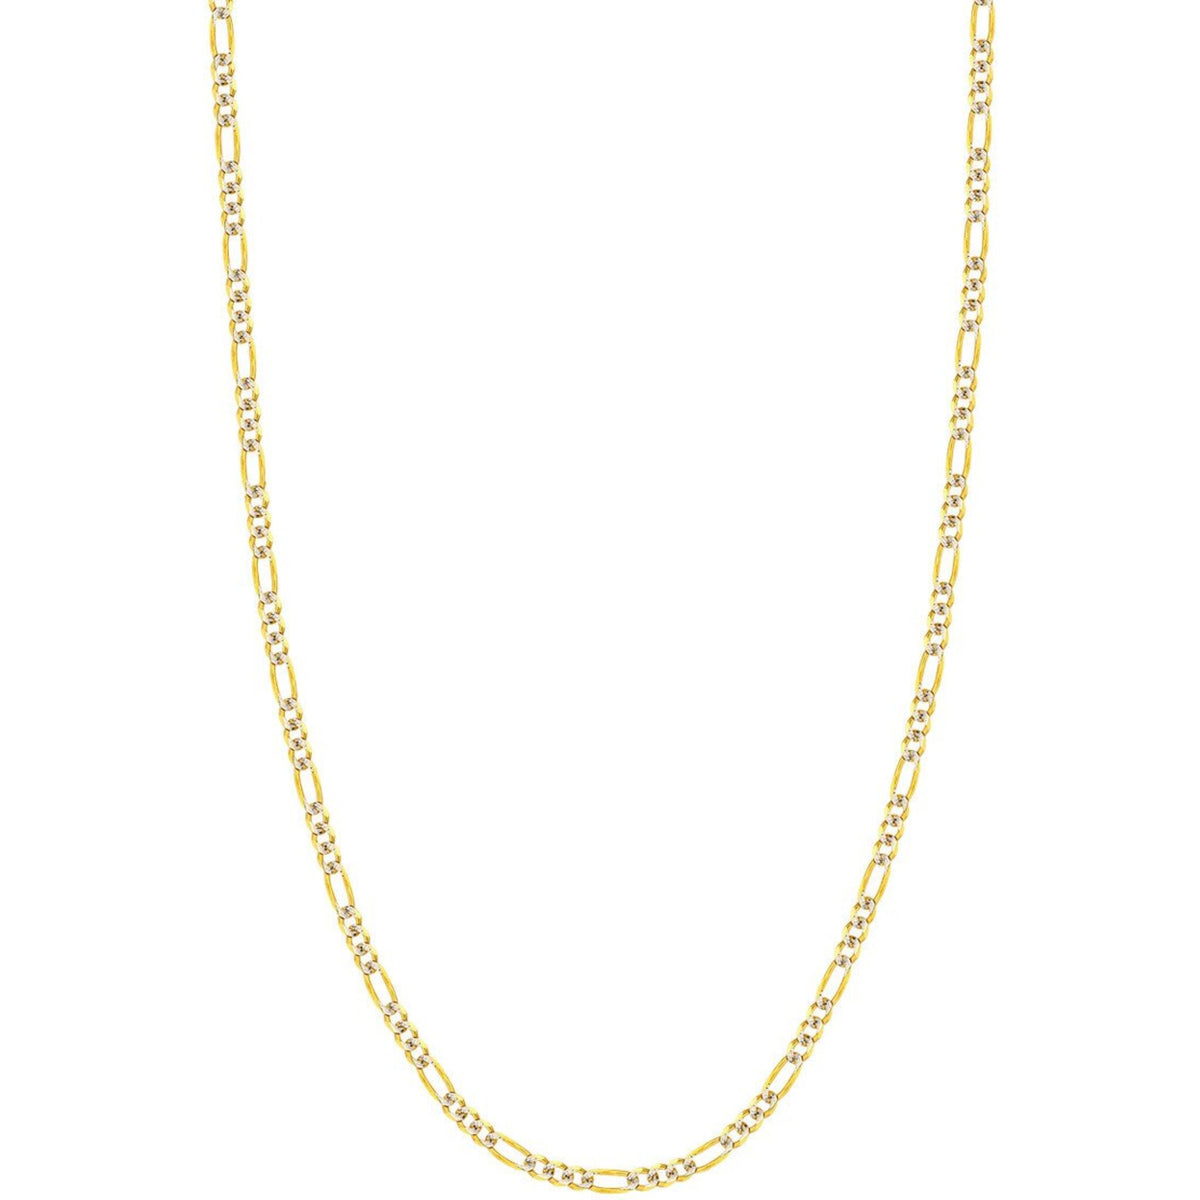 Olas d'Oro 22" Necklace - 14K Yellow/White Gold 3.2mm Two-Tone Pave Figaro Chain with Lobster Lock